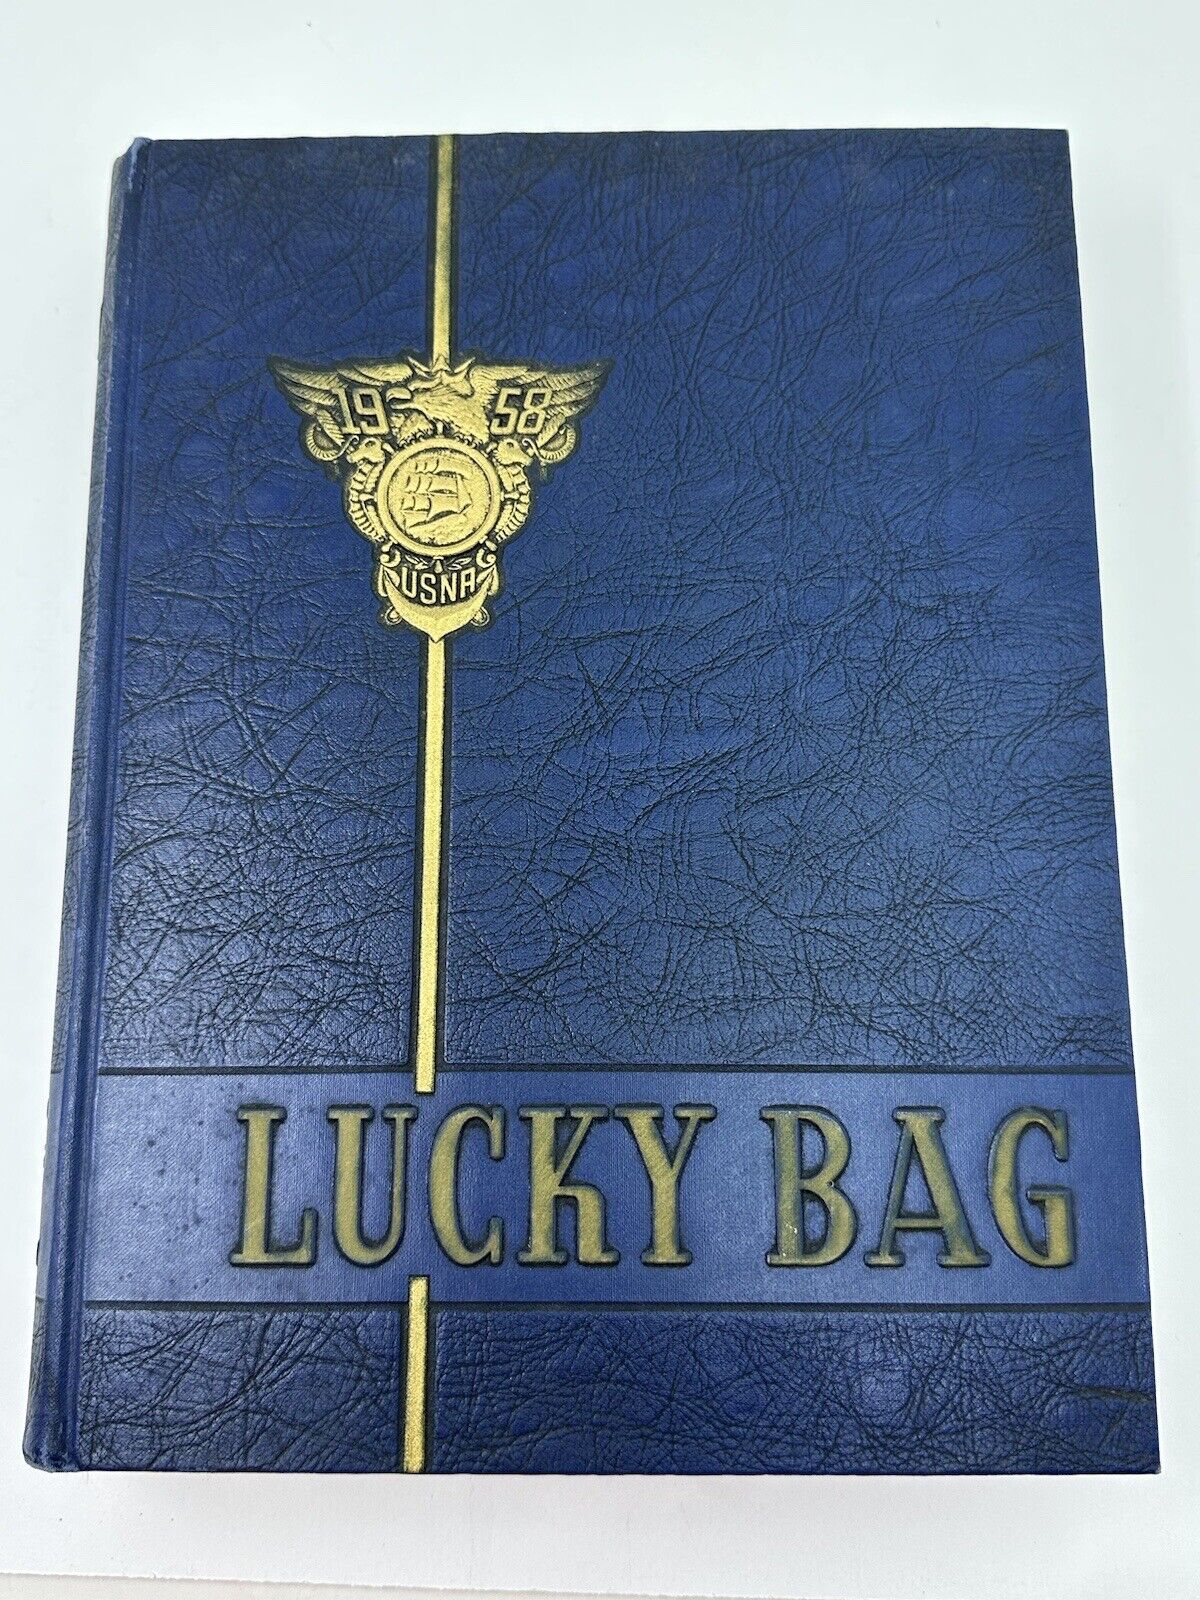 1958 US Naval Academy Yearbook Lucky Bag Navy Annapolis McCain Poindexter USNA